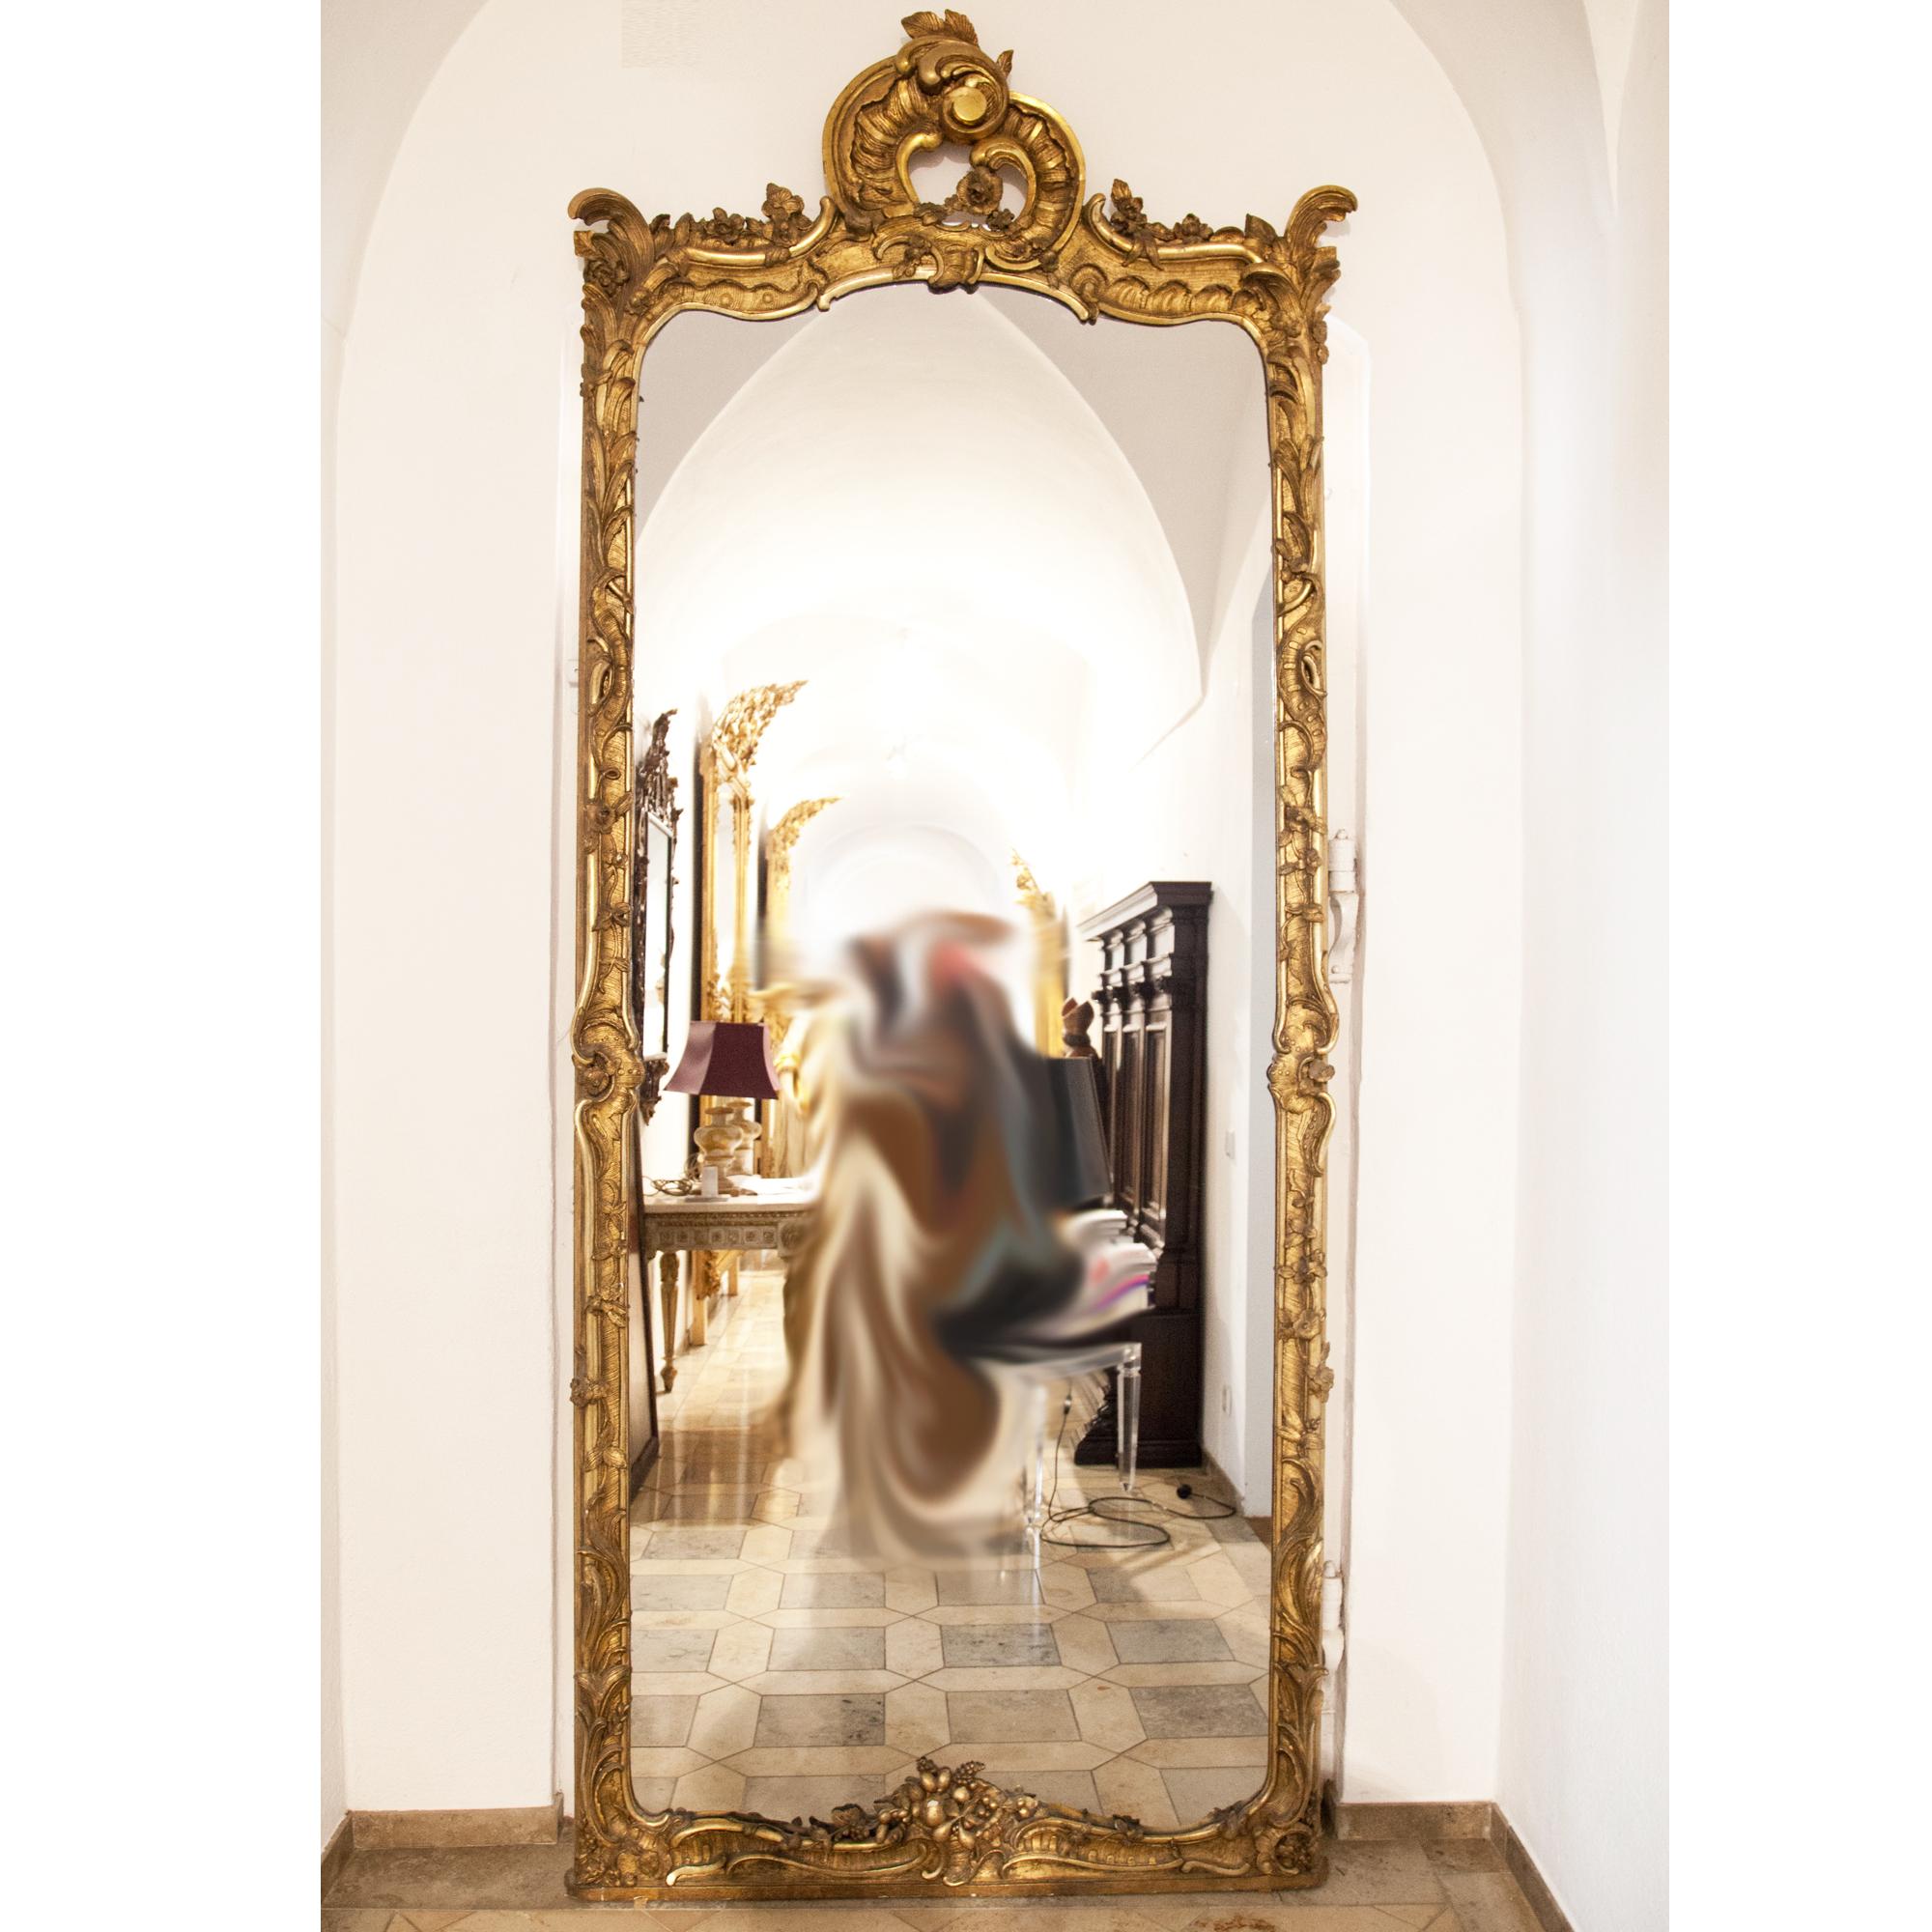 Long wall mirror in carved gold-patinated wooden frame with rocaille and fruit decorations.